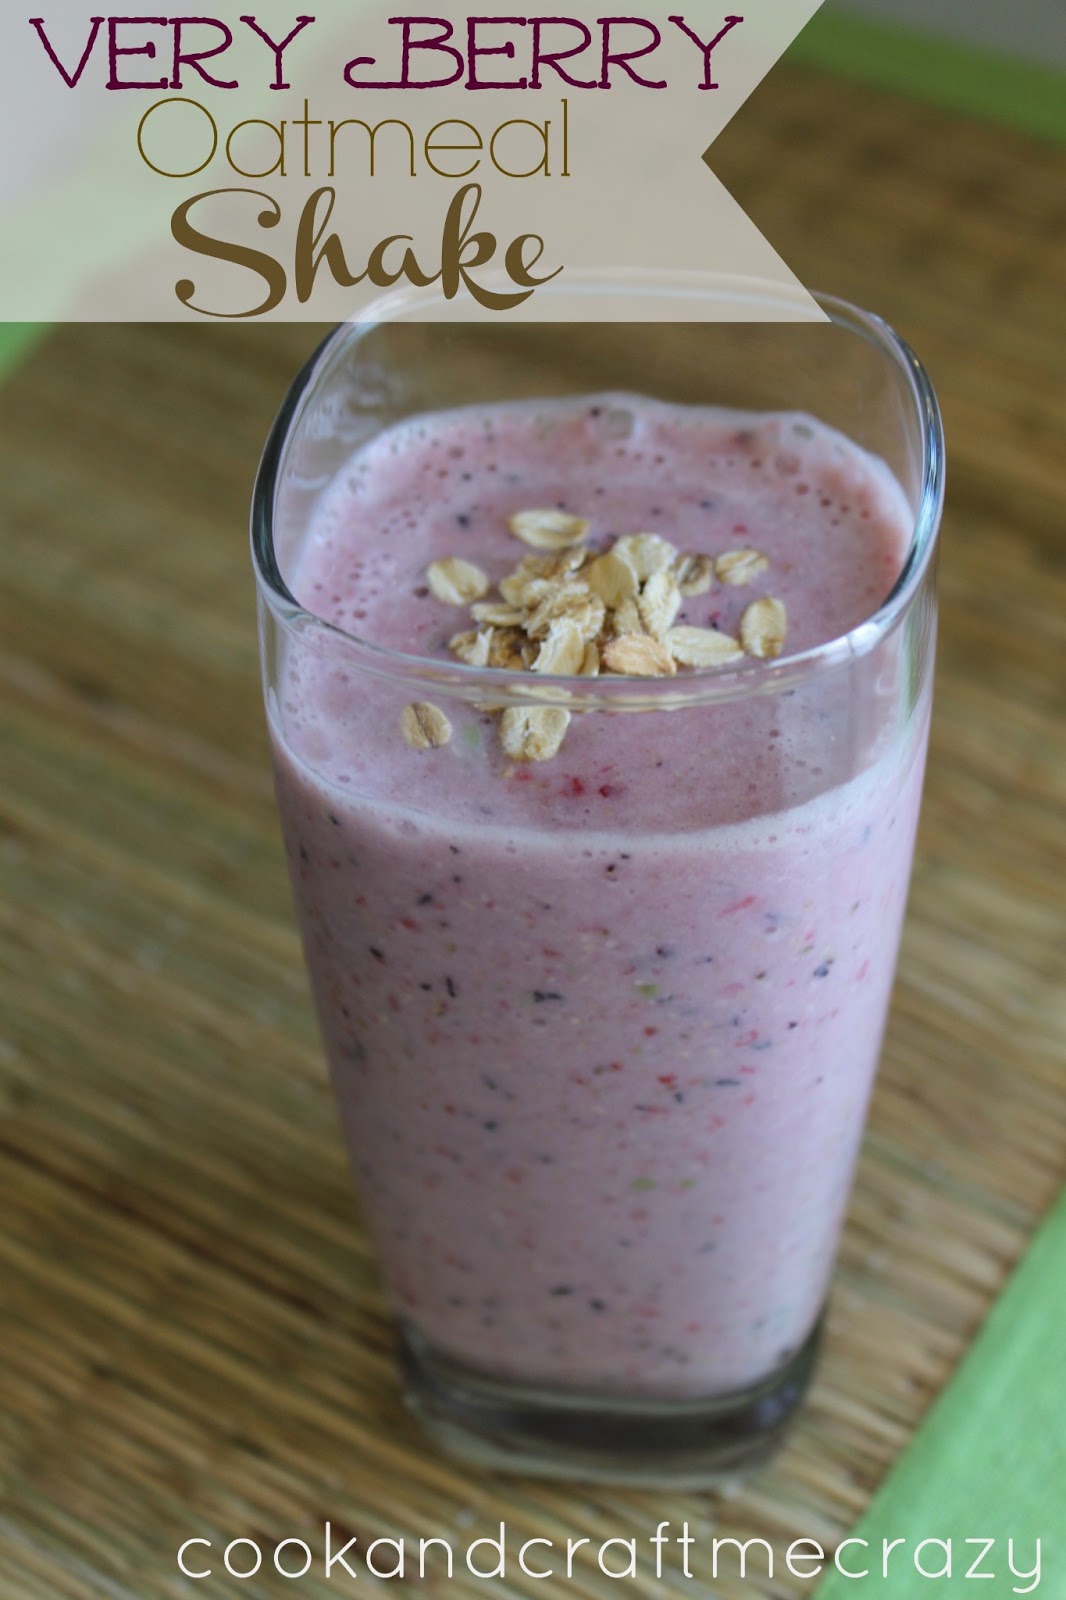 Cook and Craft Me Crazy: Very Berry Oatmeal Shake